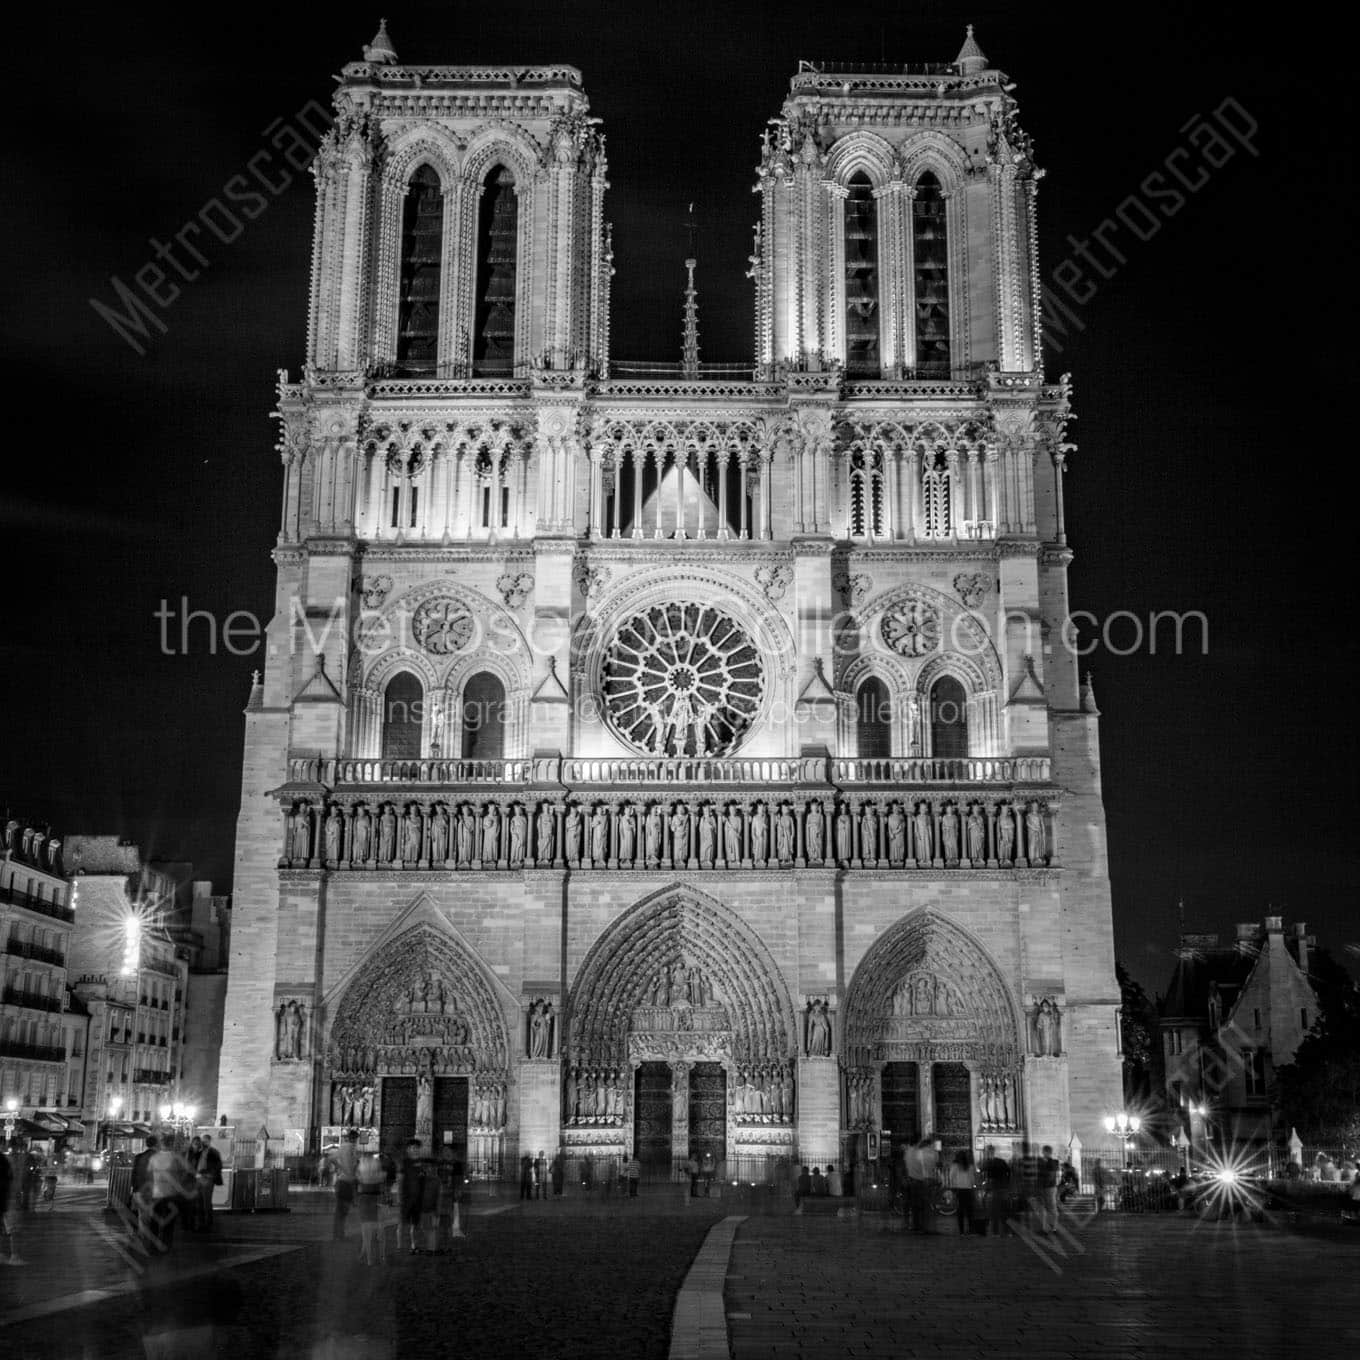 paris notre dame cathedral at night Black & White Office Art